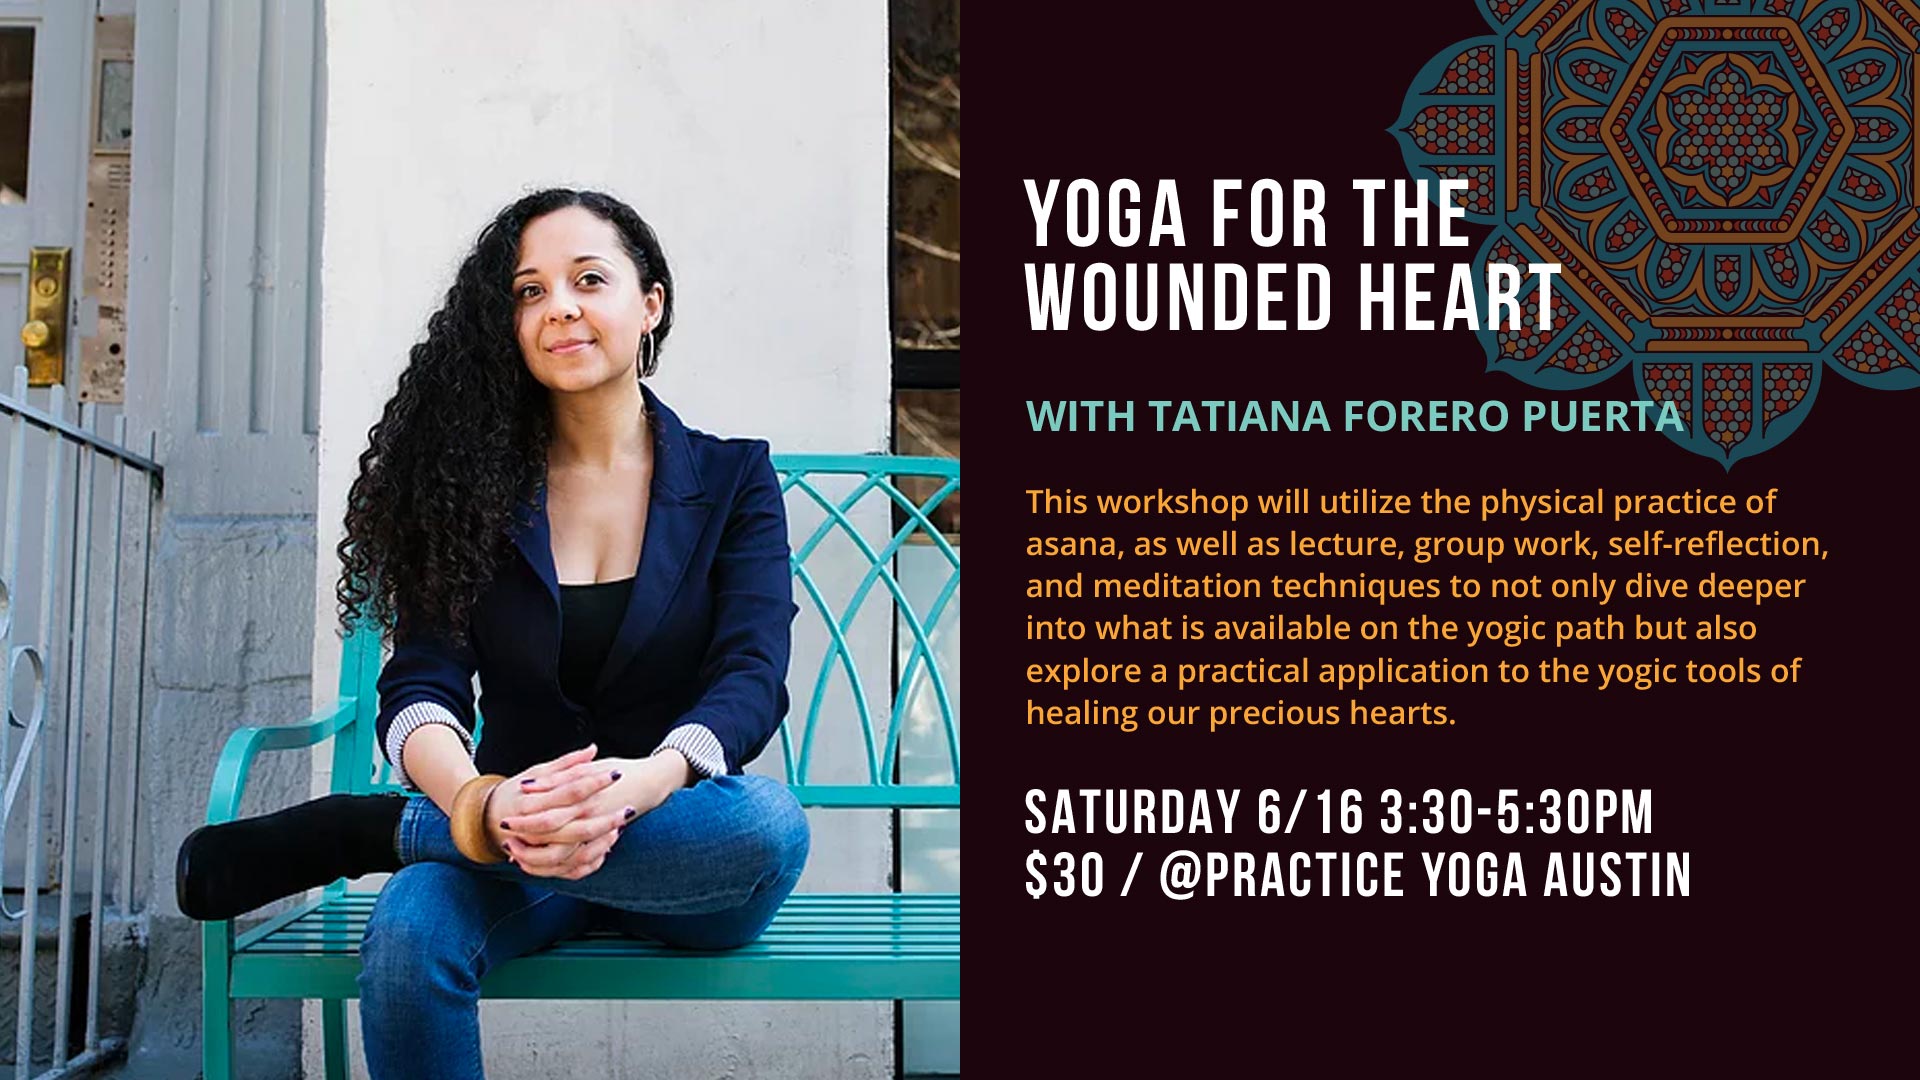 Yoga for the Wounded Heart with Tatiana